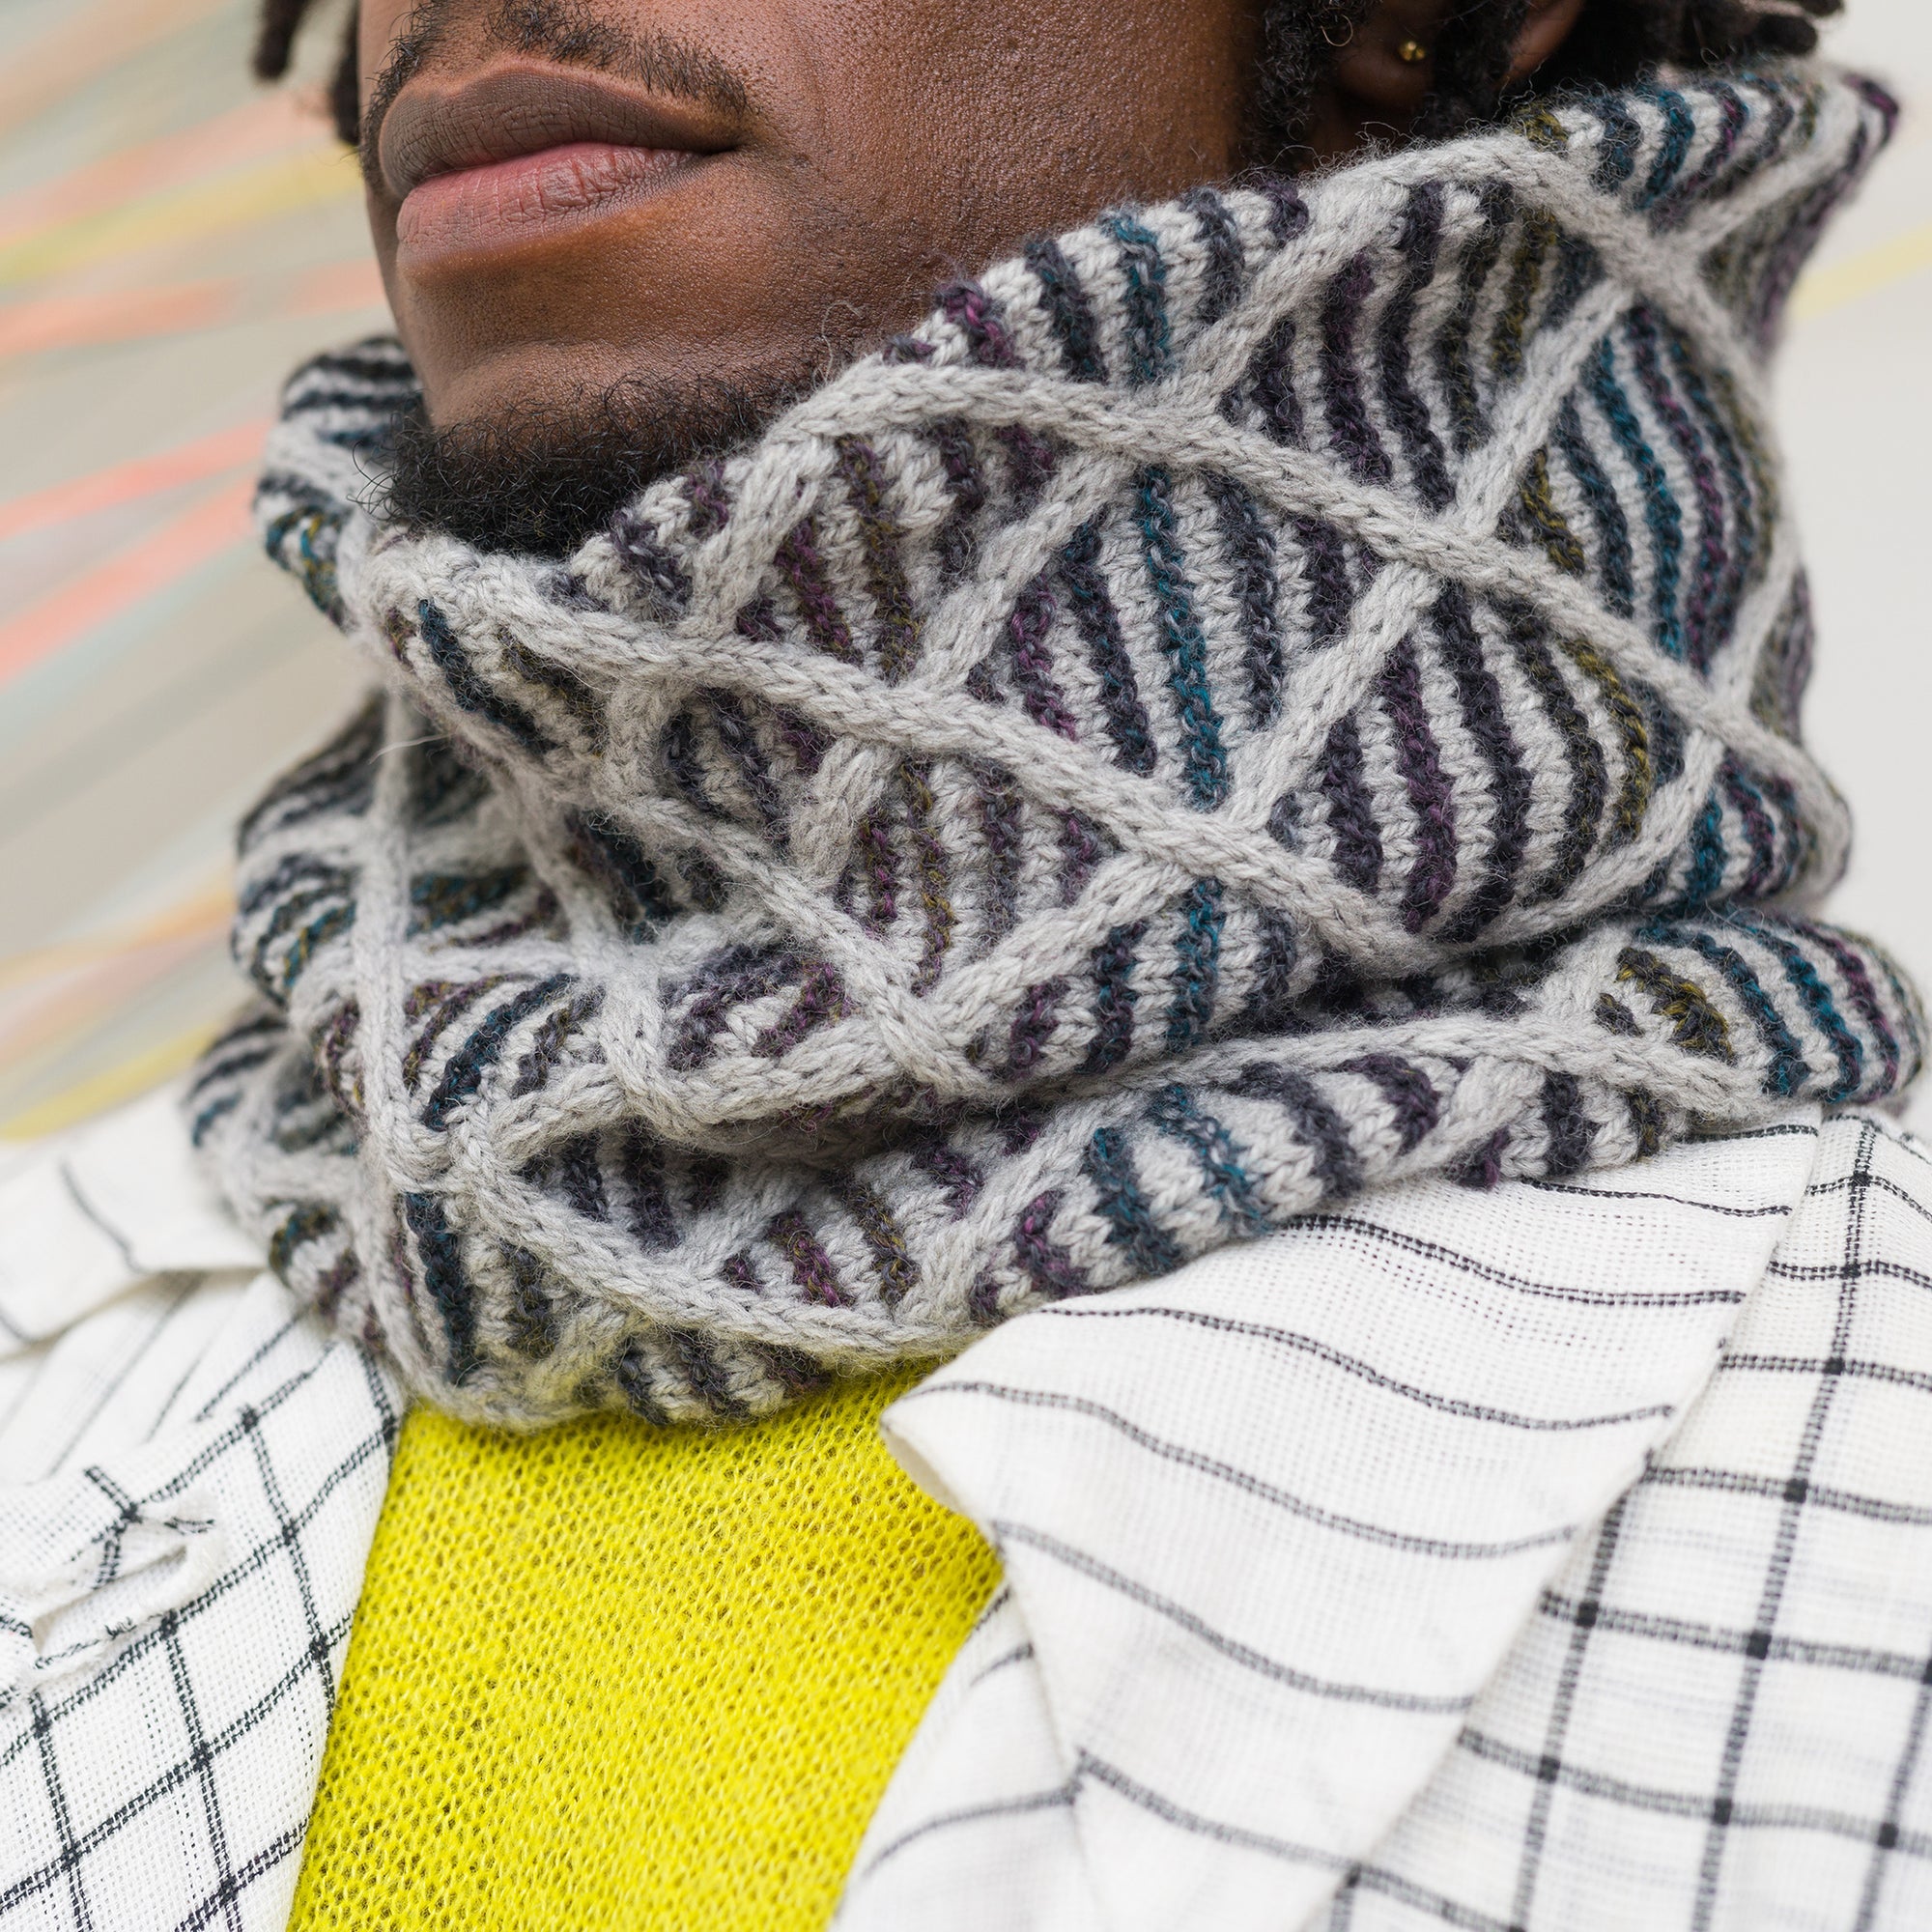 Cabled Trellis Cowl